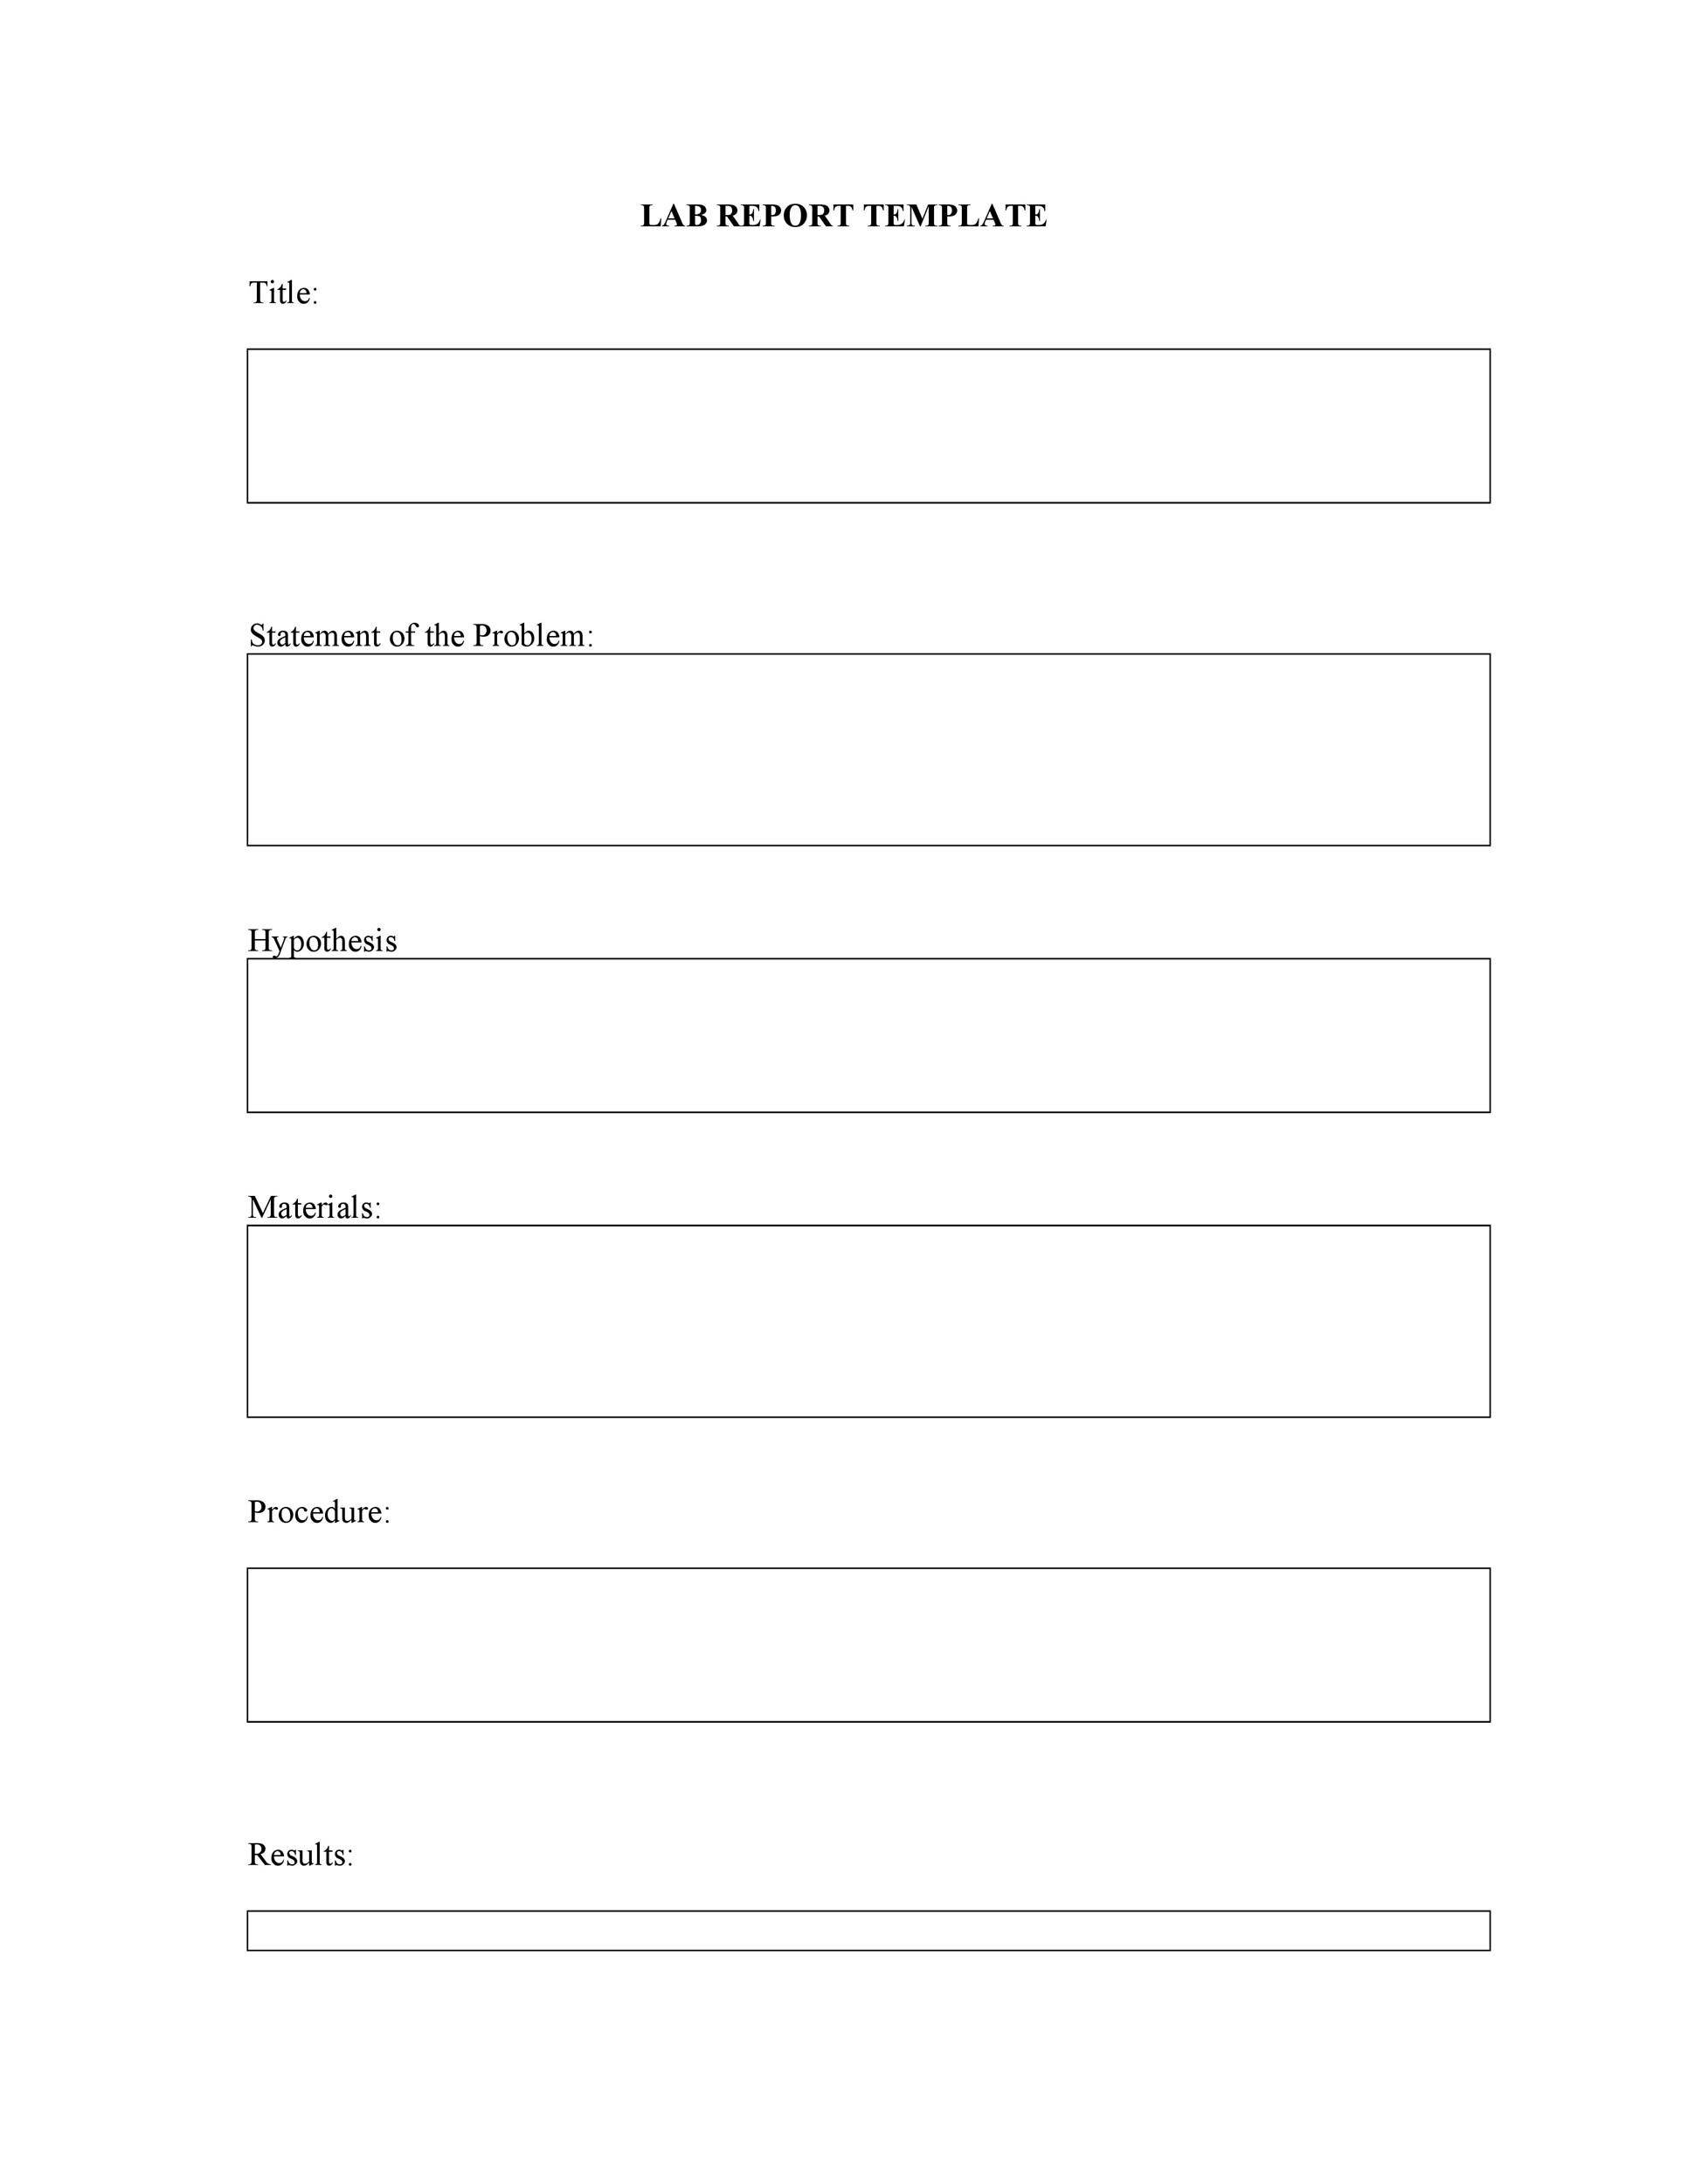 Free lab report template 15